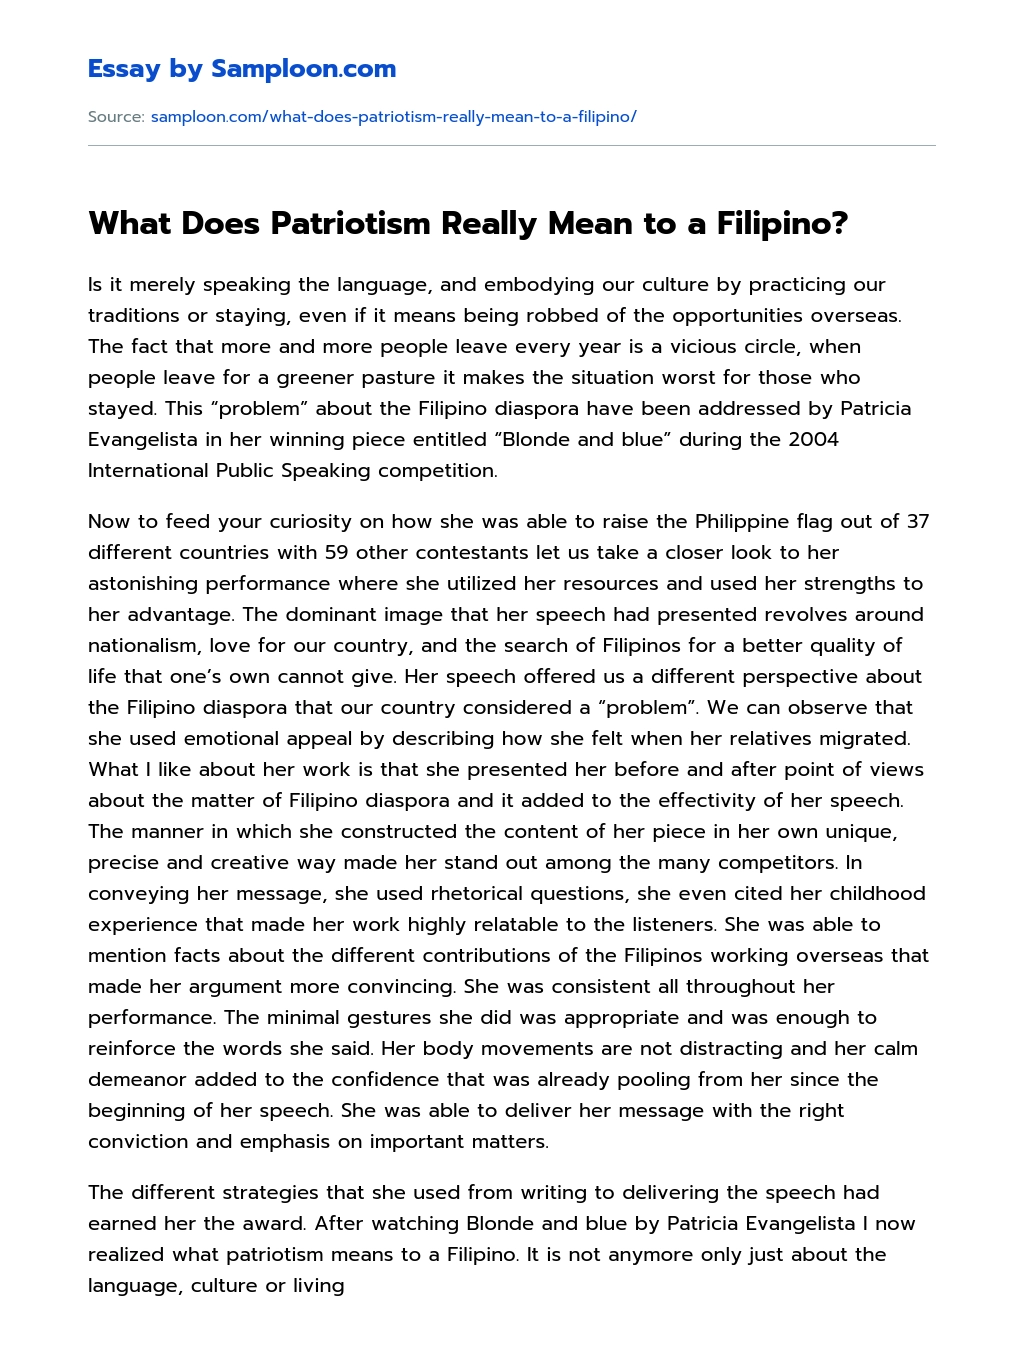 What Does Patriotism Really Mean to a Filipino? essay